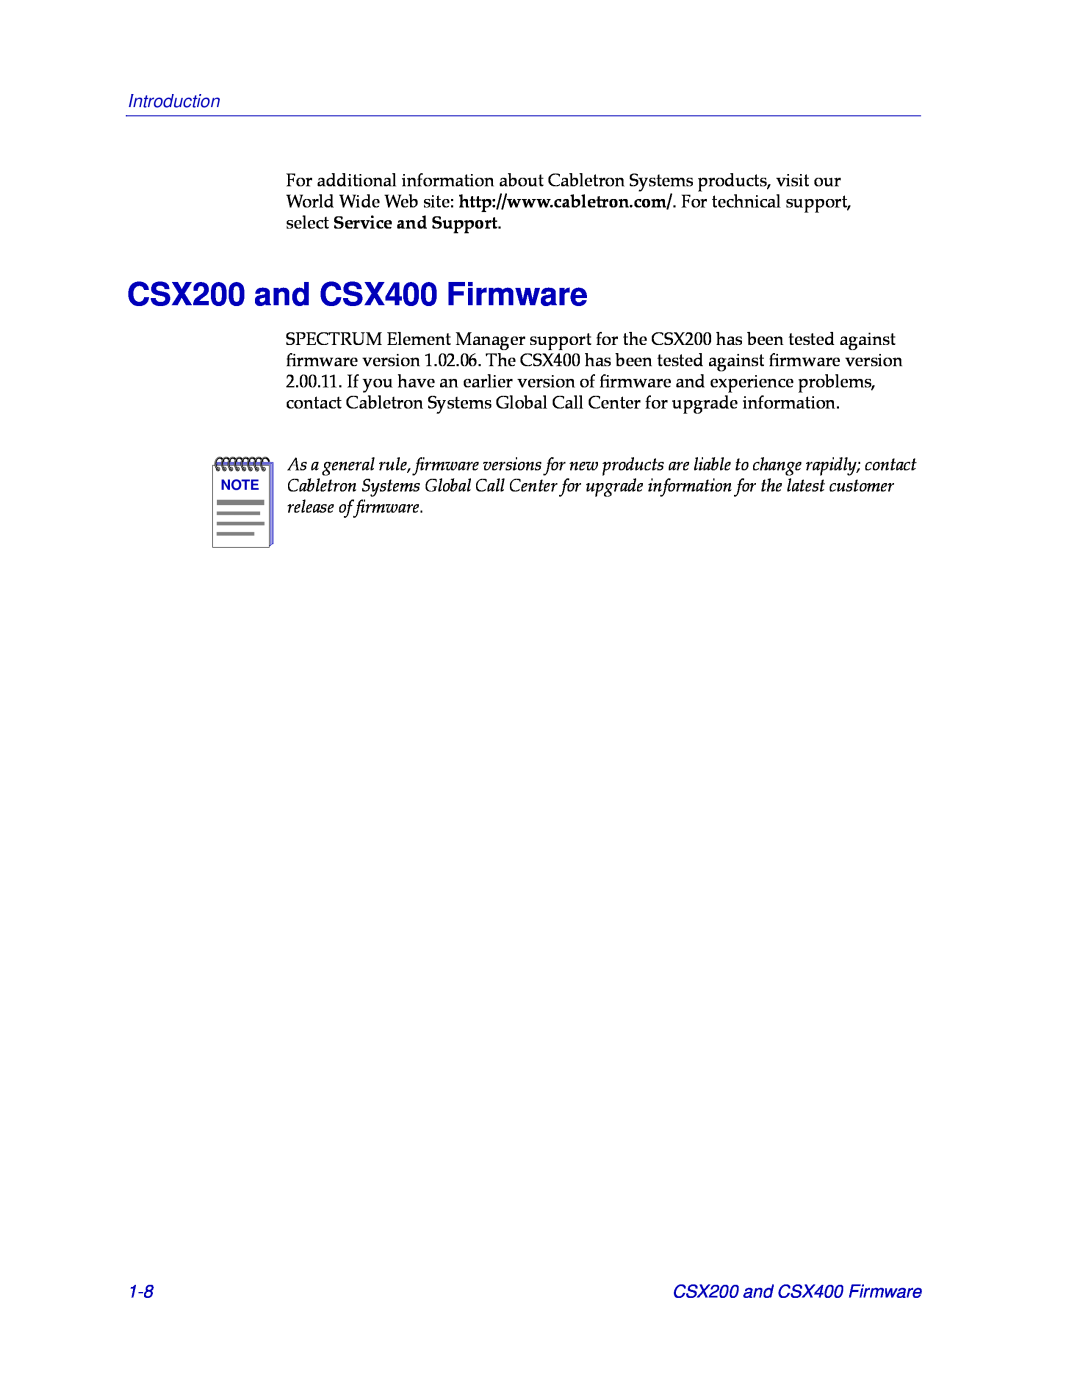 Cabletron Systems manual CSX200 and CSX400 Firmware, Introduction 